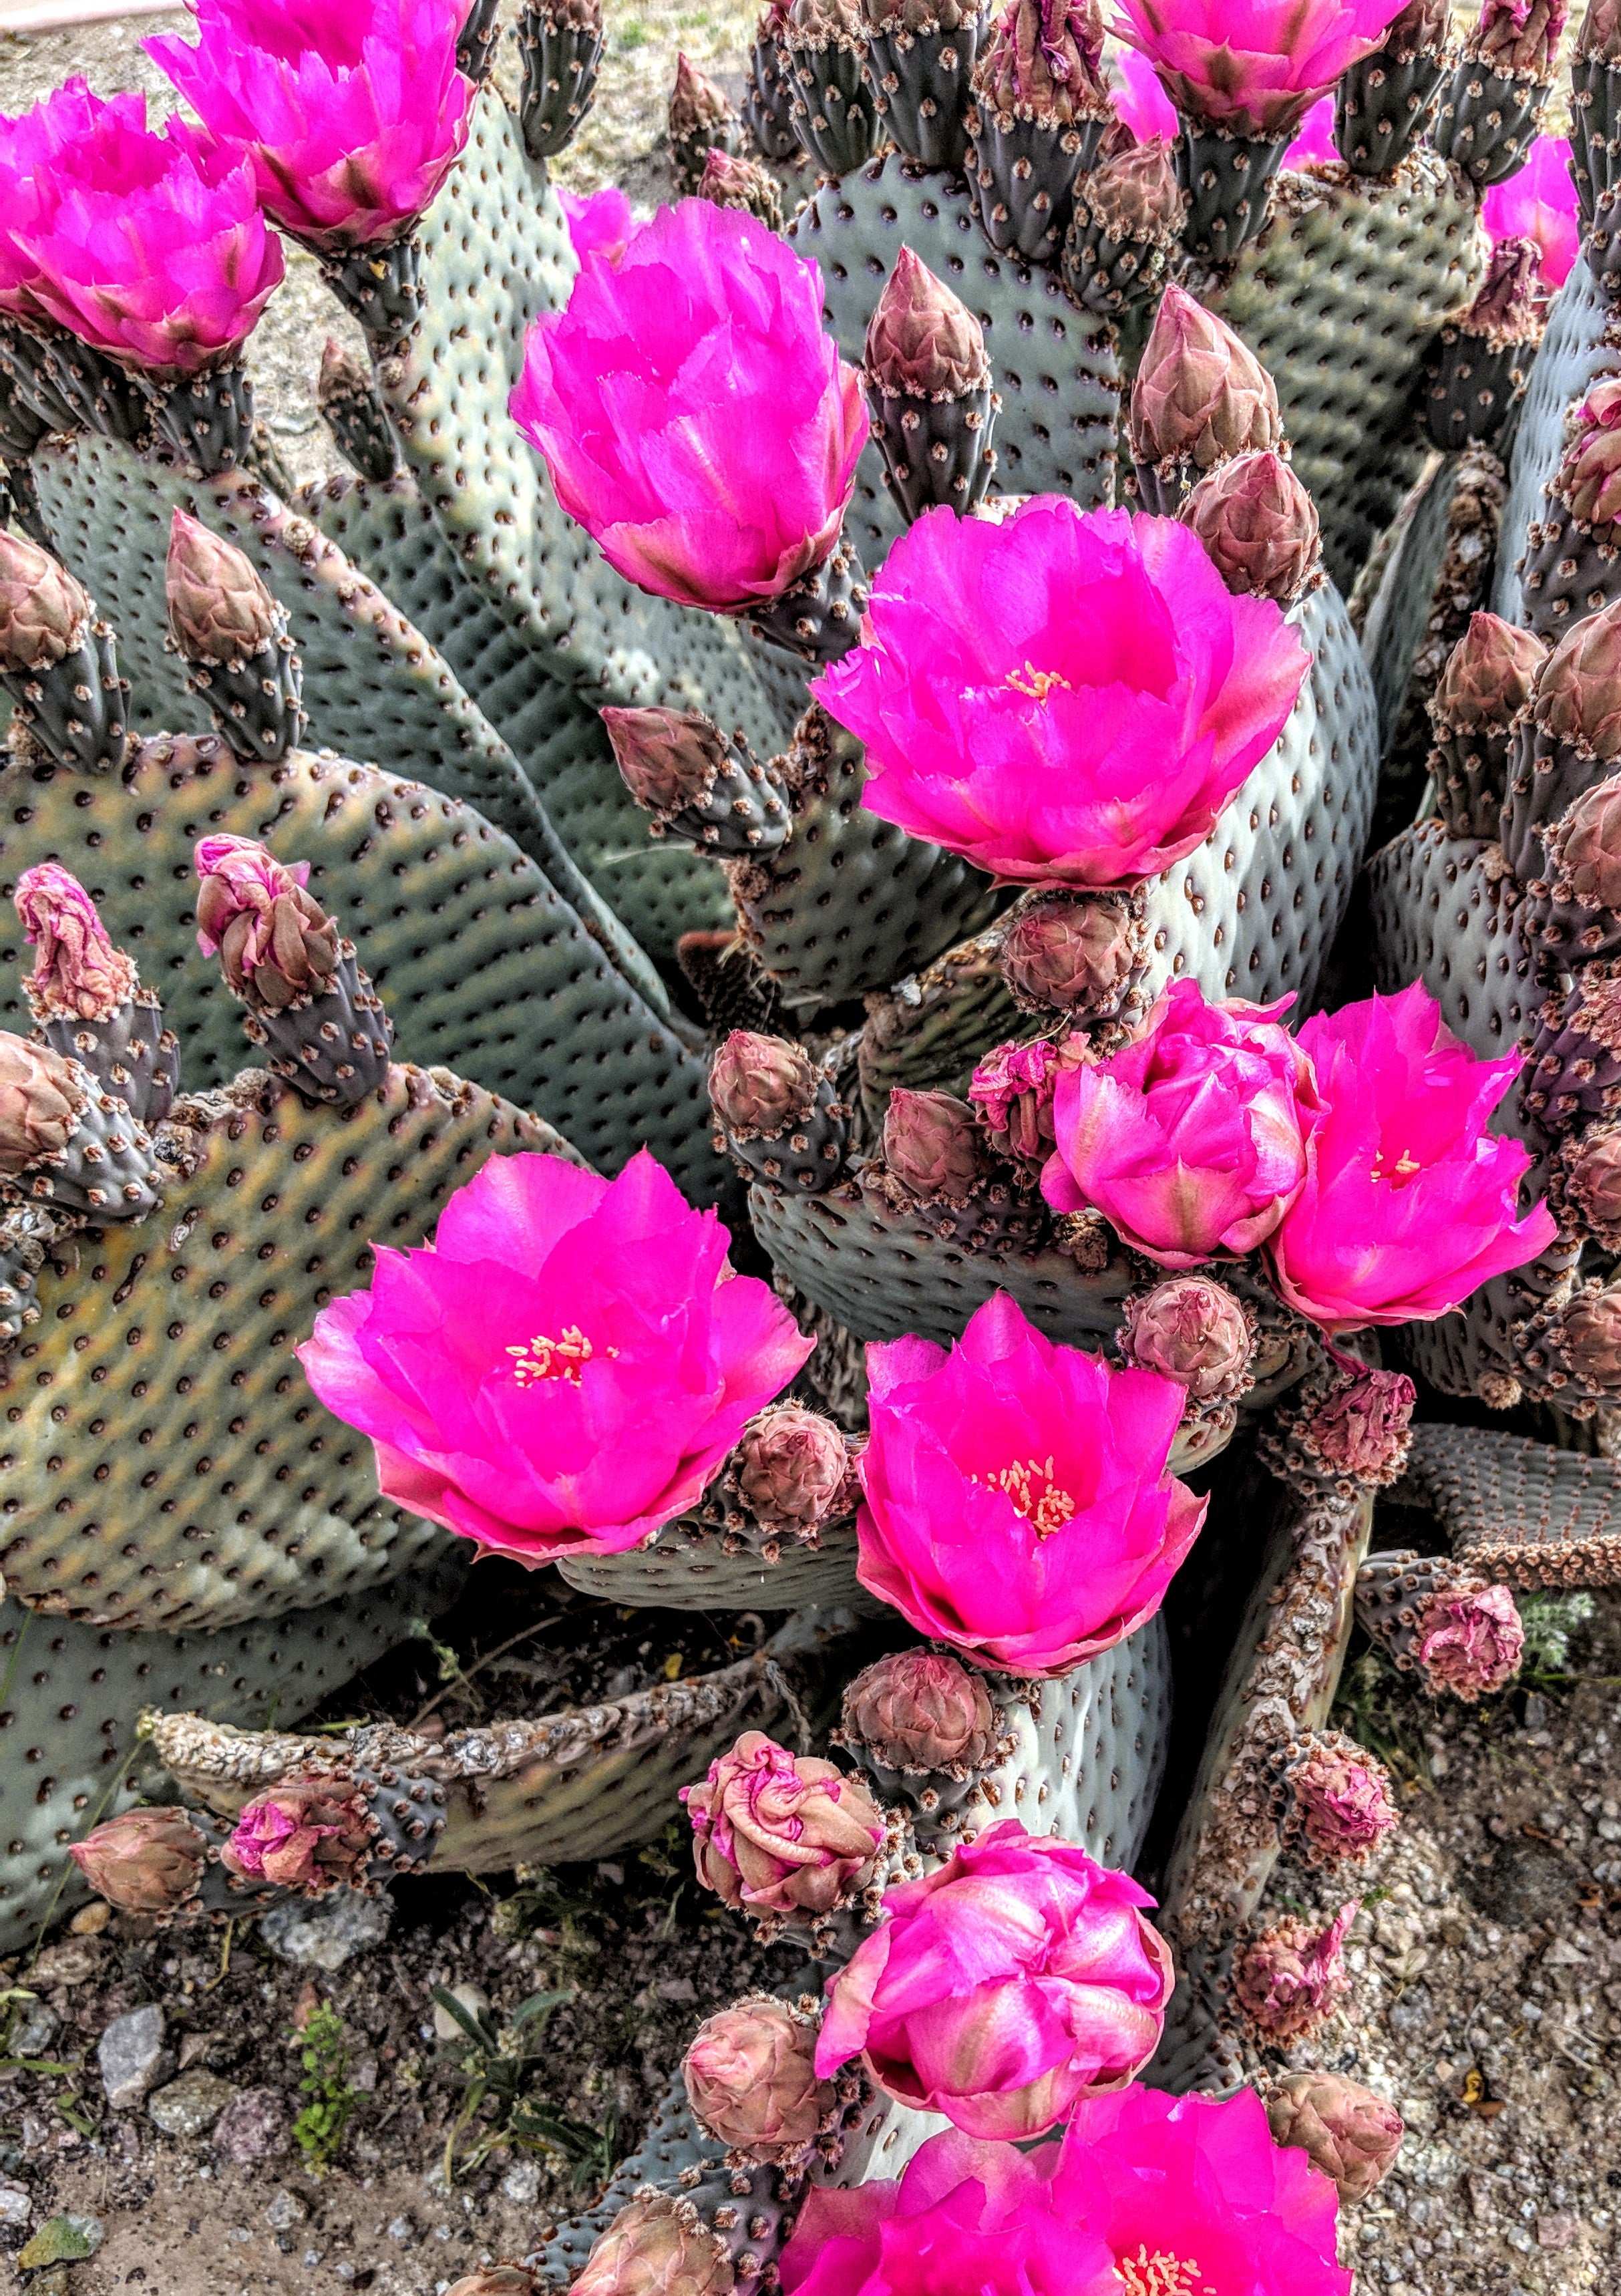 Beaver Tail Cactus bloom in April!  An absolutely amazing site.